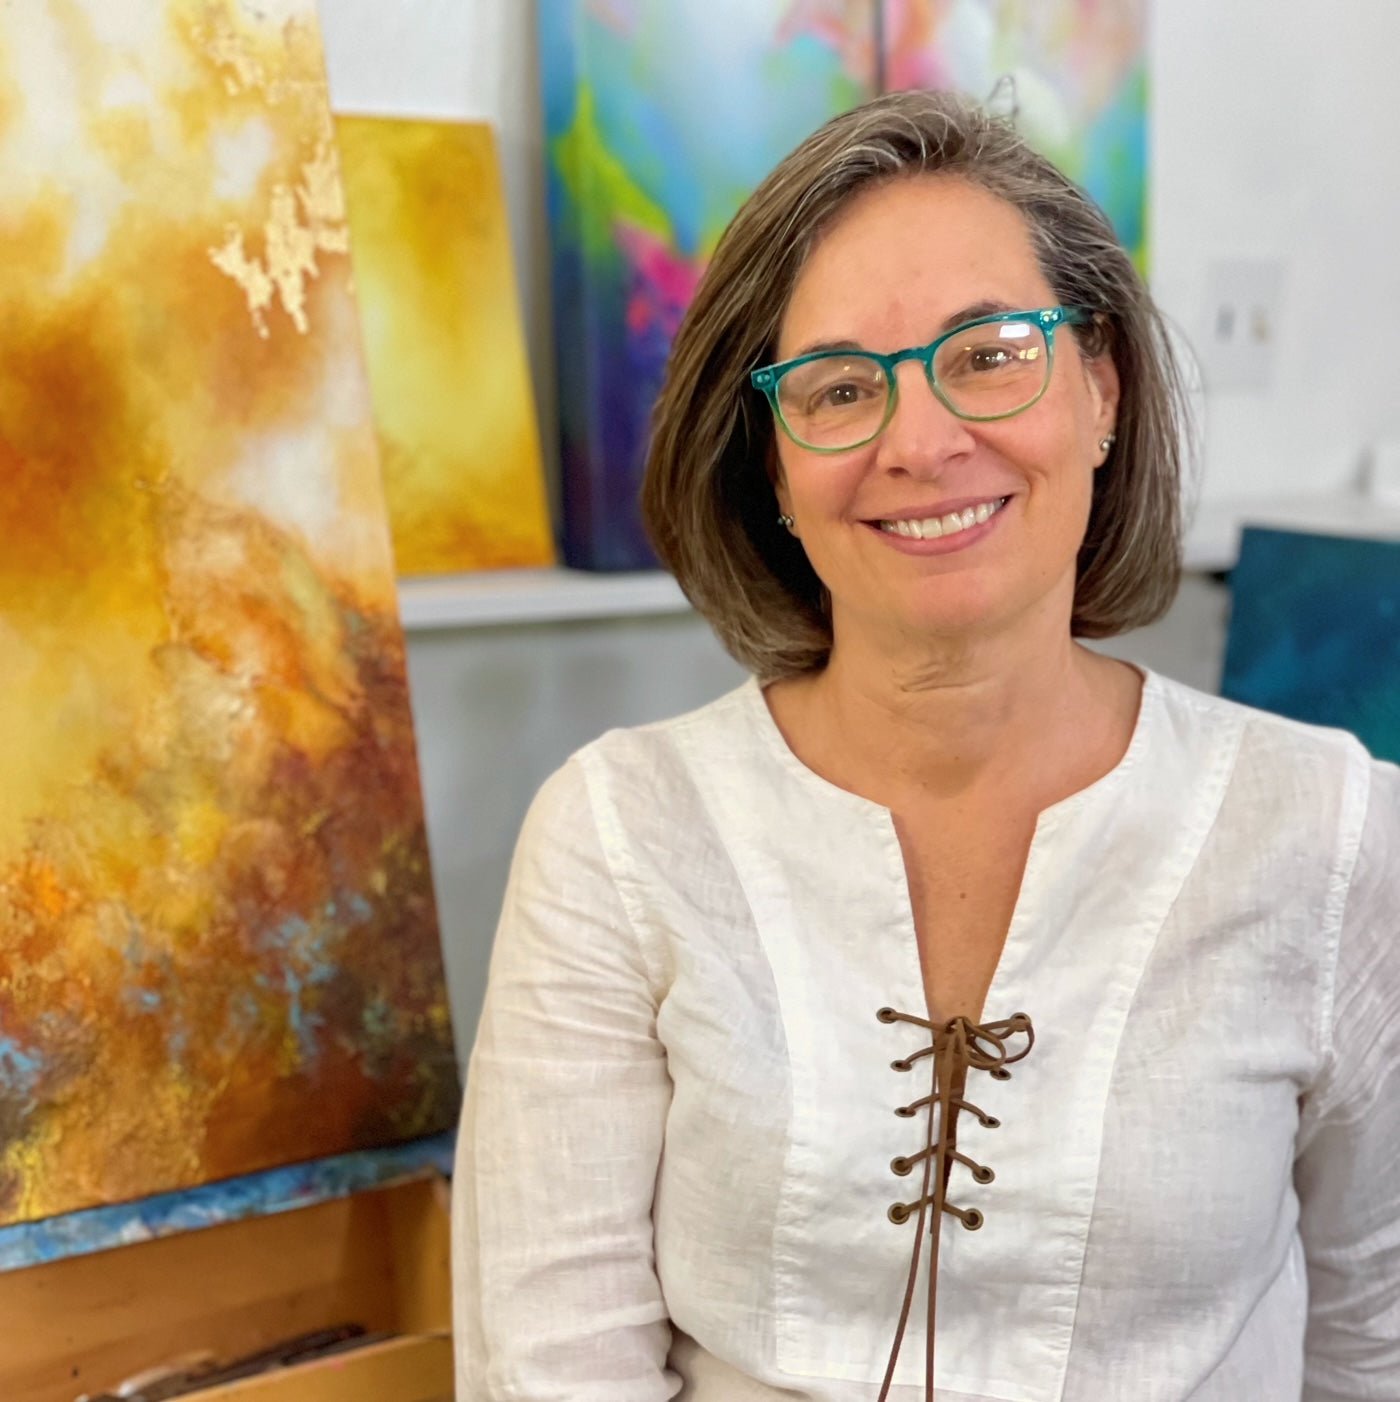 Jennifer Tepper sits in her New Mexico studio, wearing aqua blue glasses and wearing a white blouse with leather lacing up the front, in front of several of her abstract paintings. Jennifer Tepper Fine Art